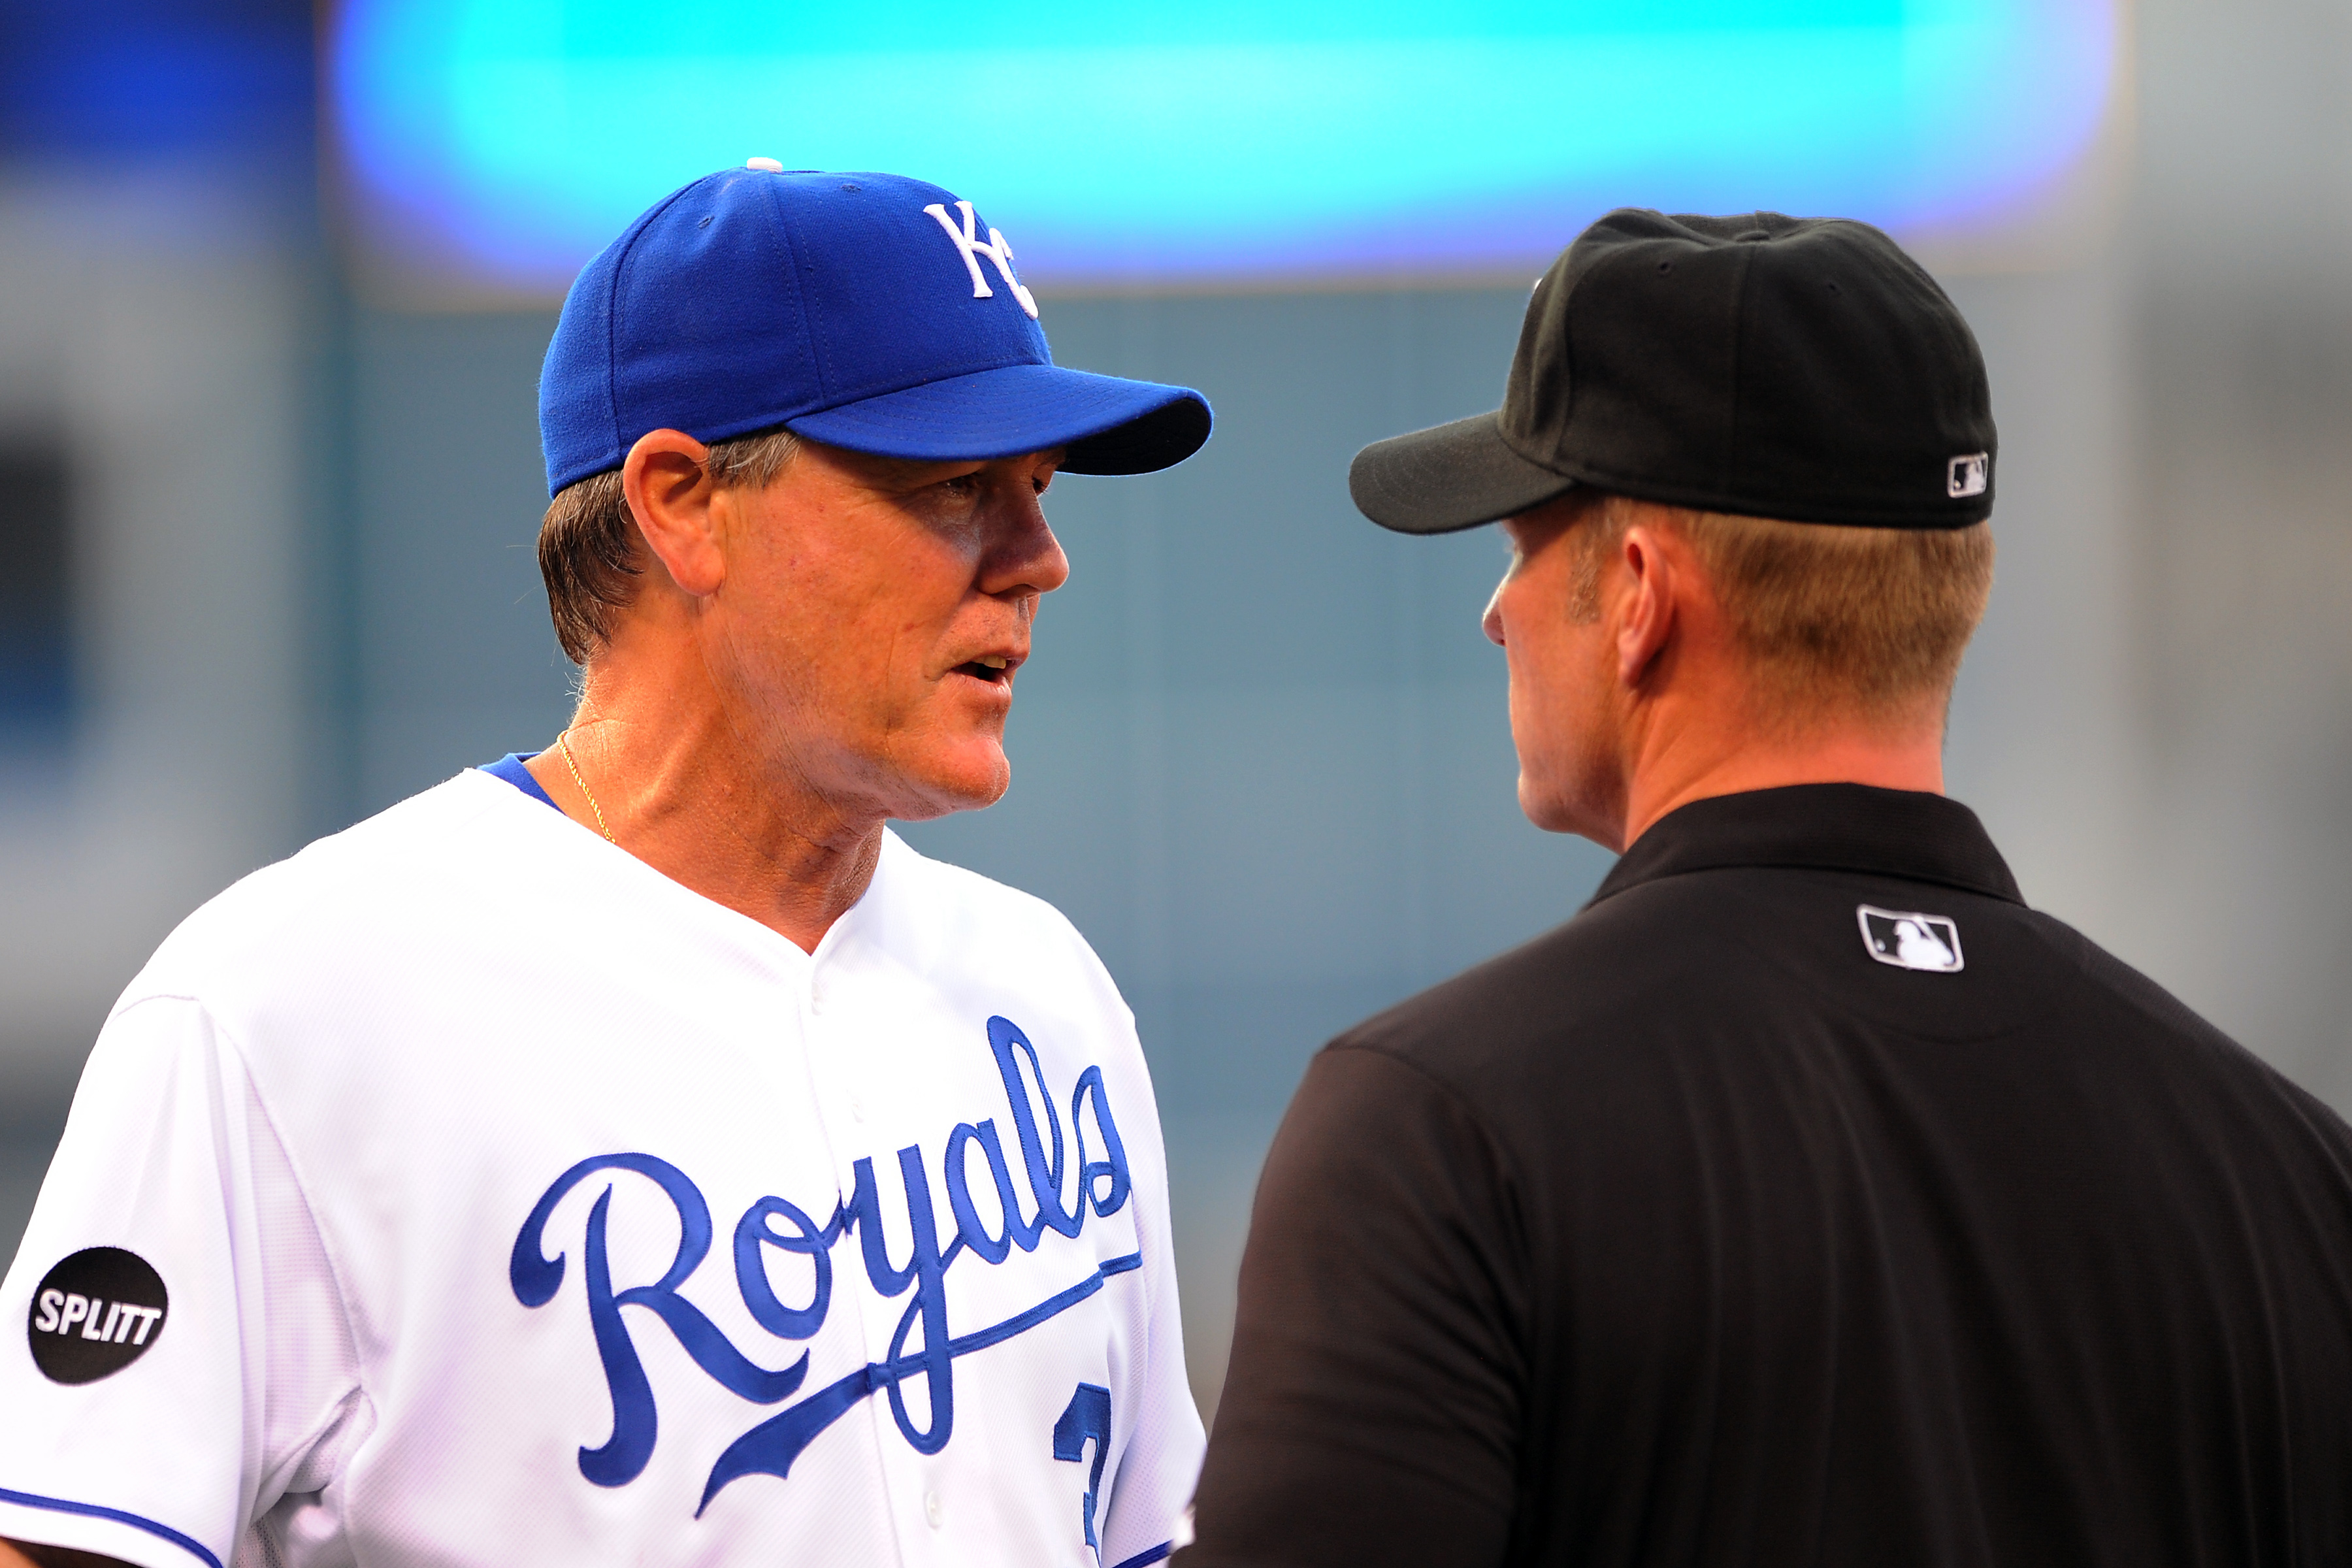 Hitting coach Sveum keeps the Royals' line moving during KC's second  straight World Series